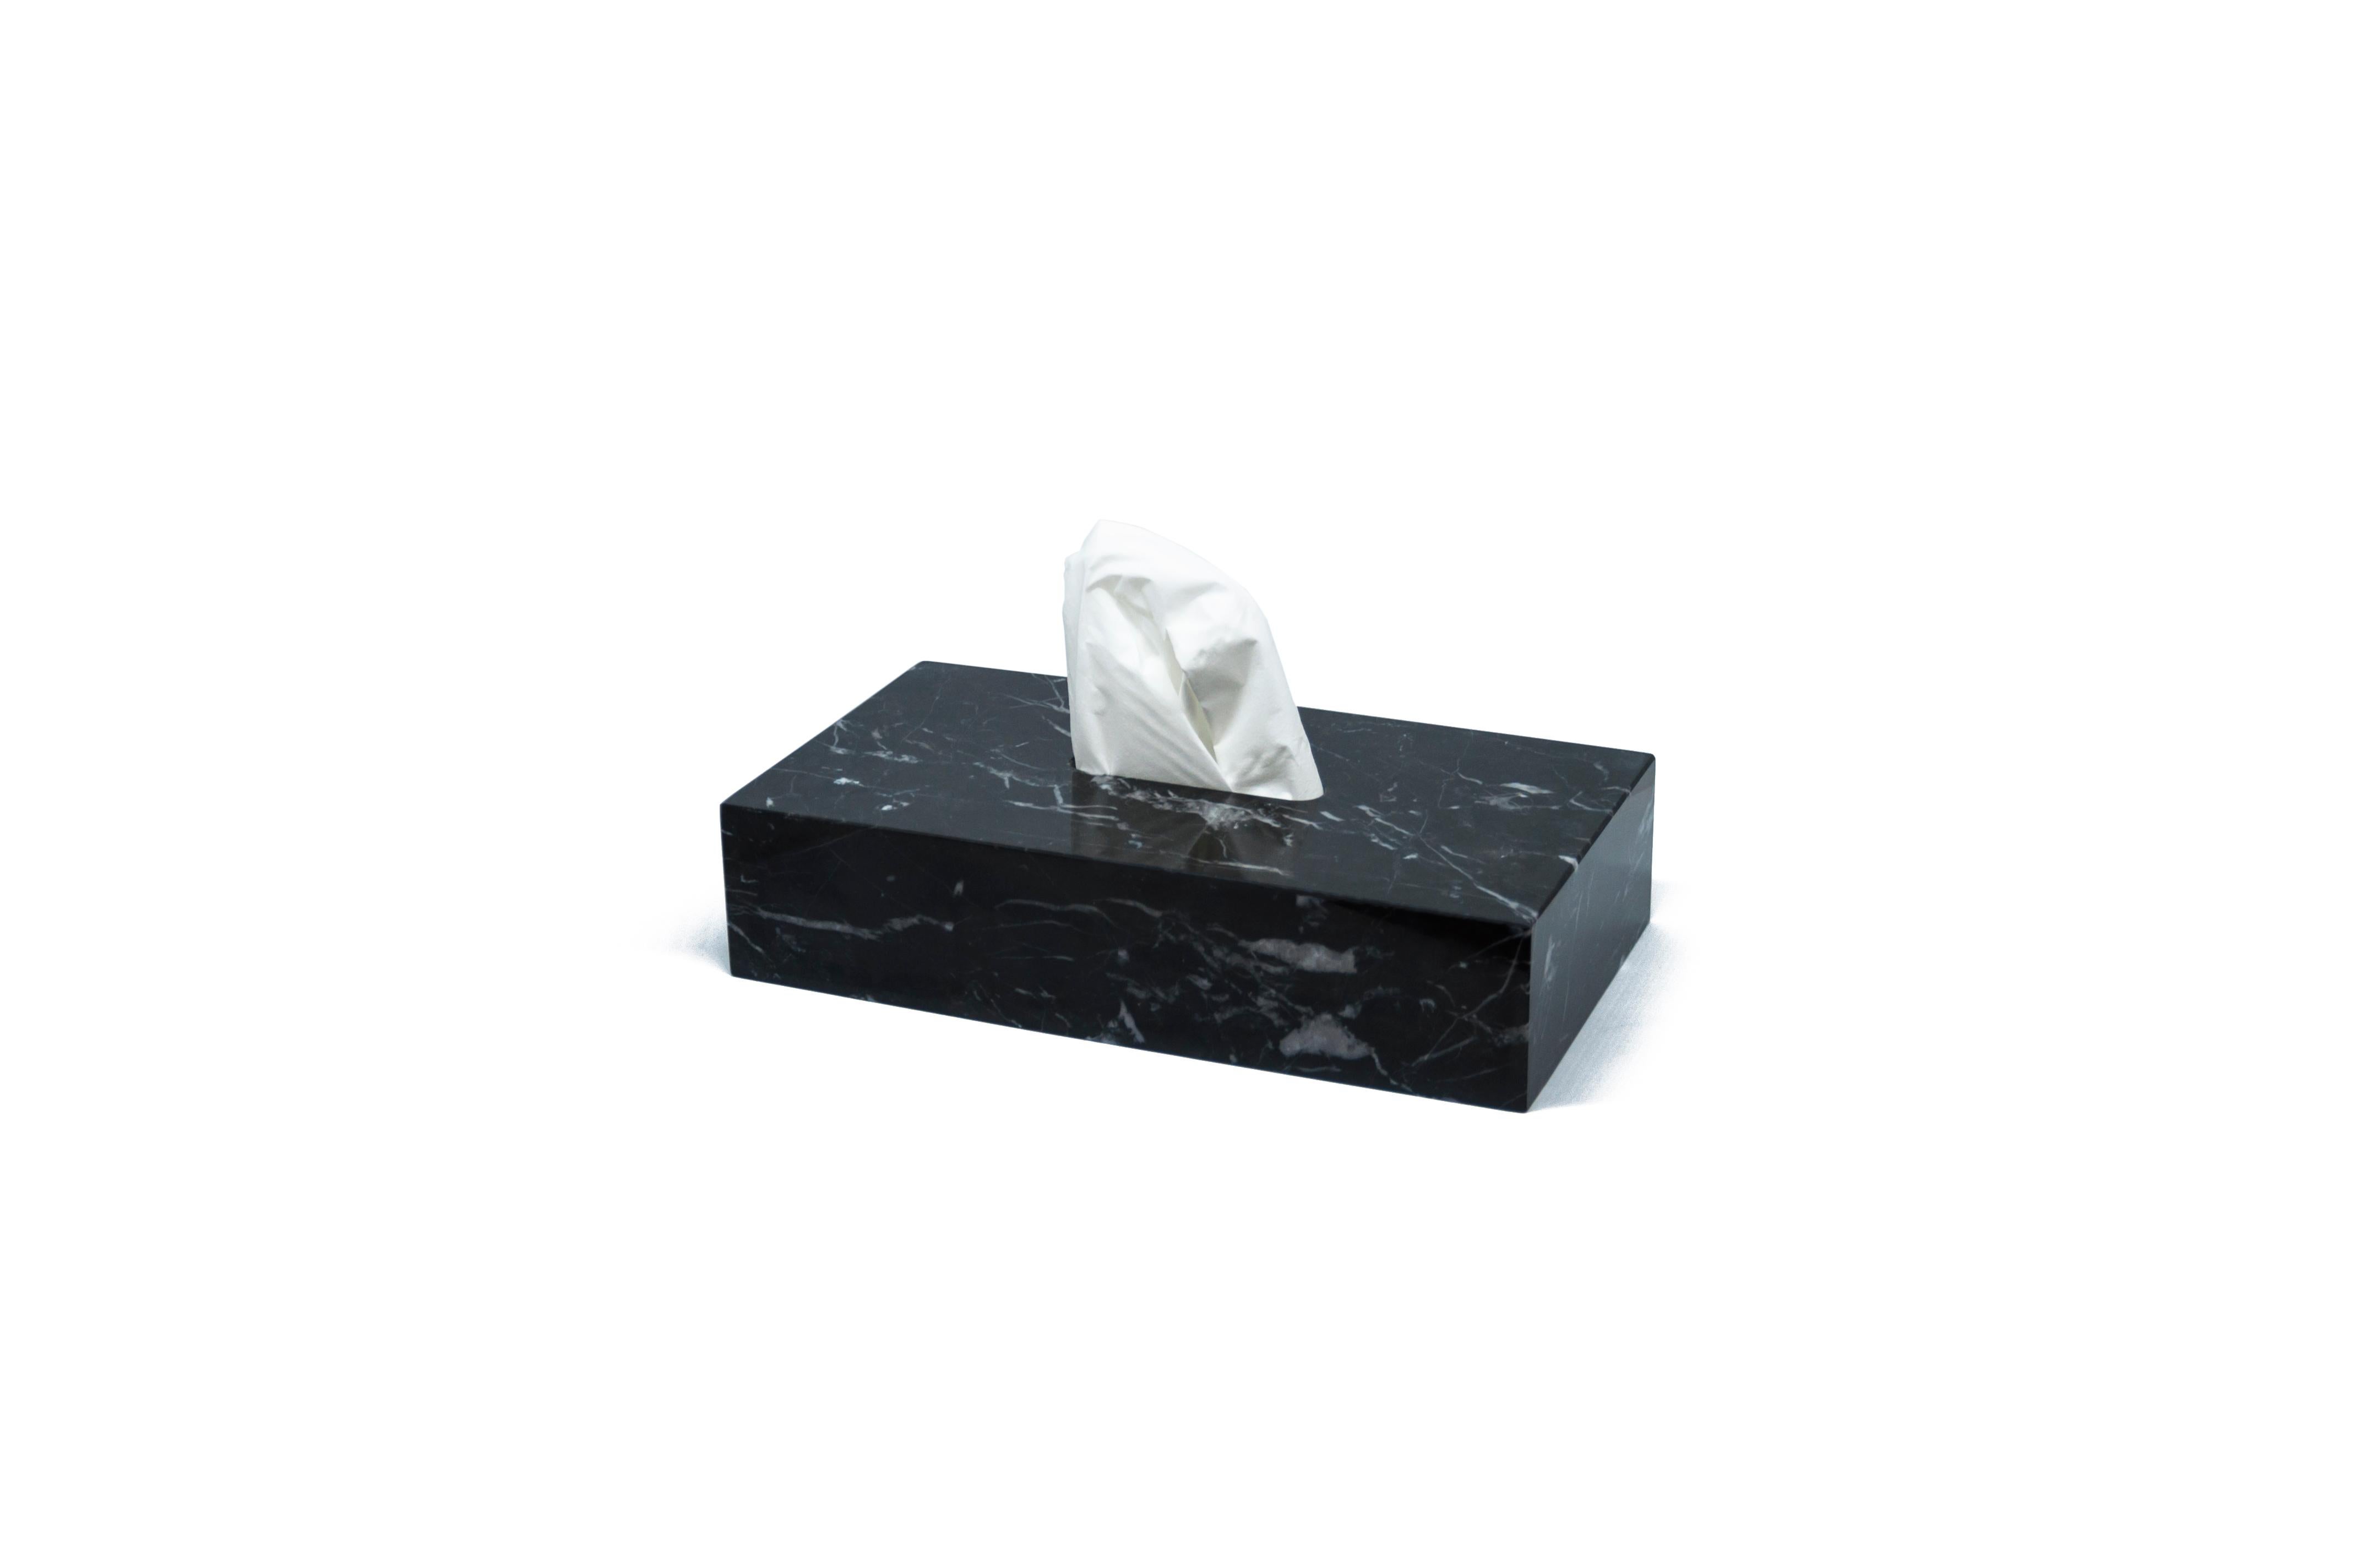 Rectangular tissues cover box in black Marquina marble.
Each piece is in a way unique (since each marble block is different in veins and shades) and handcrafted in Italy. Slight variations in shape, color and size are to be considered a guarantee of